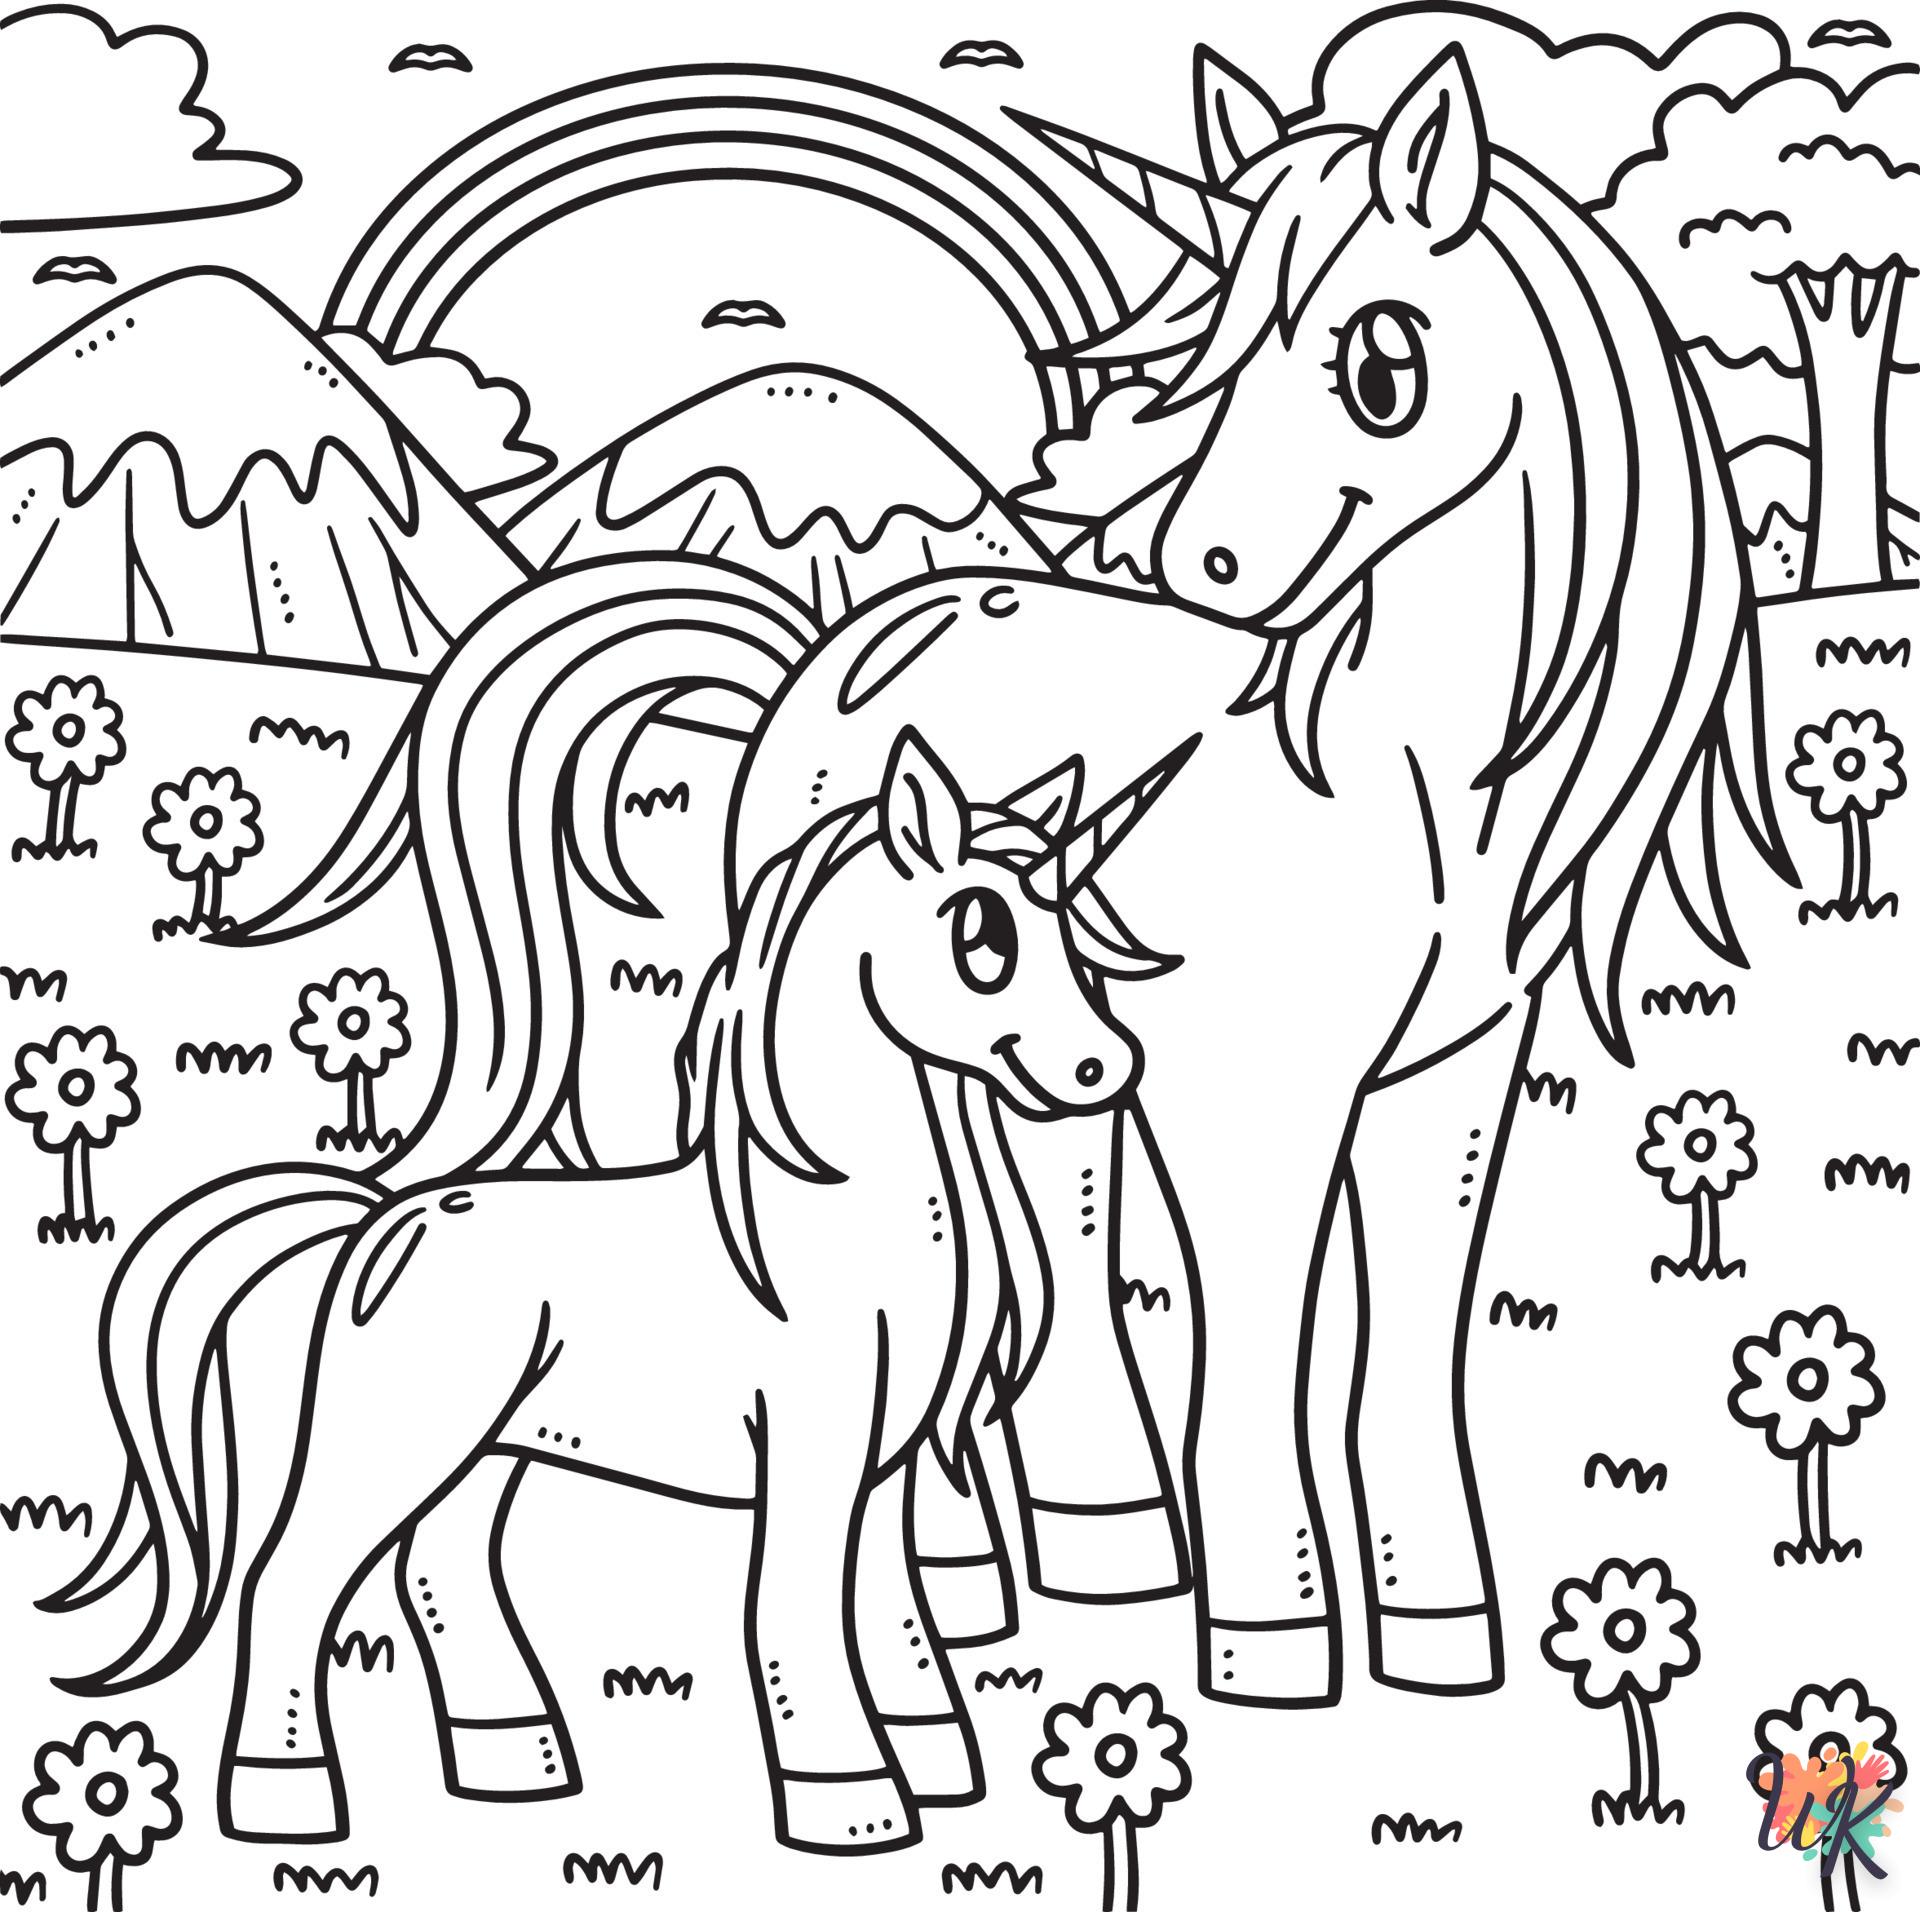 Unicorn cards coloring pages